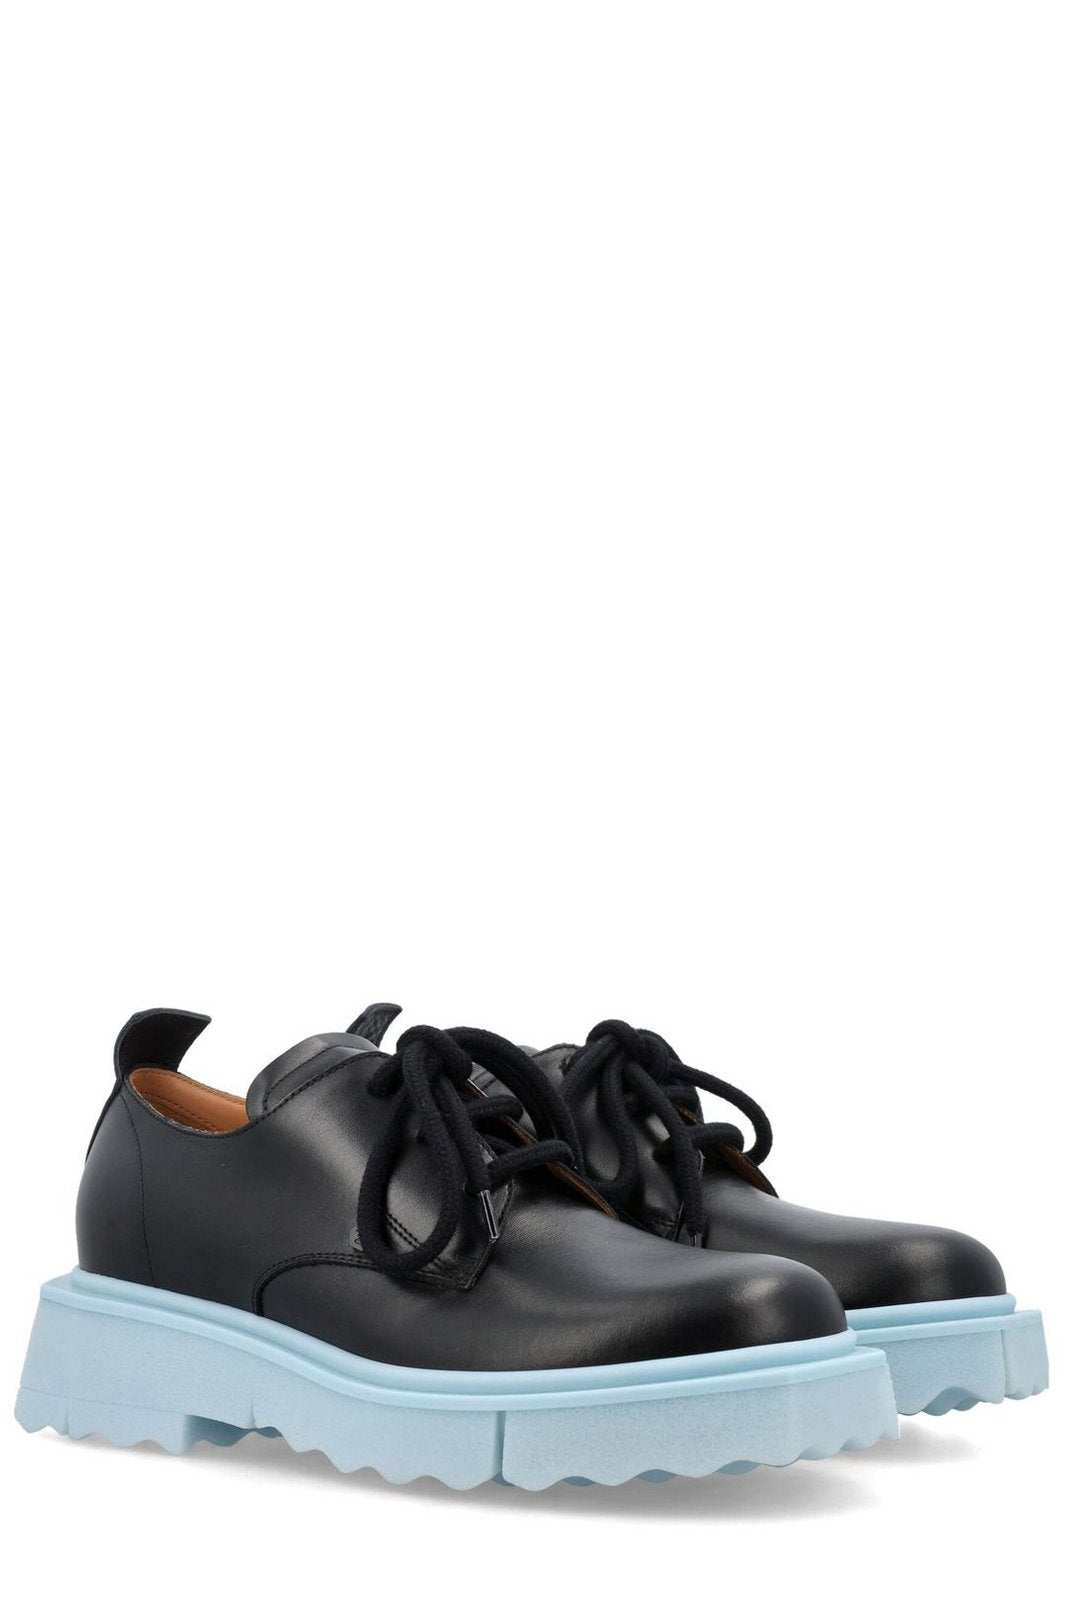 Off-White Round Toe Derby Shoes